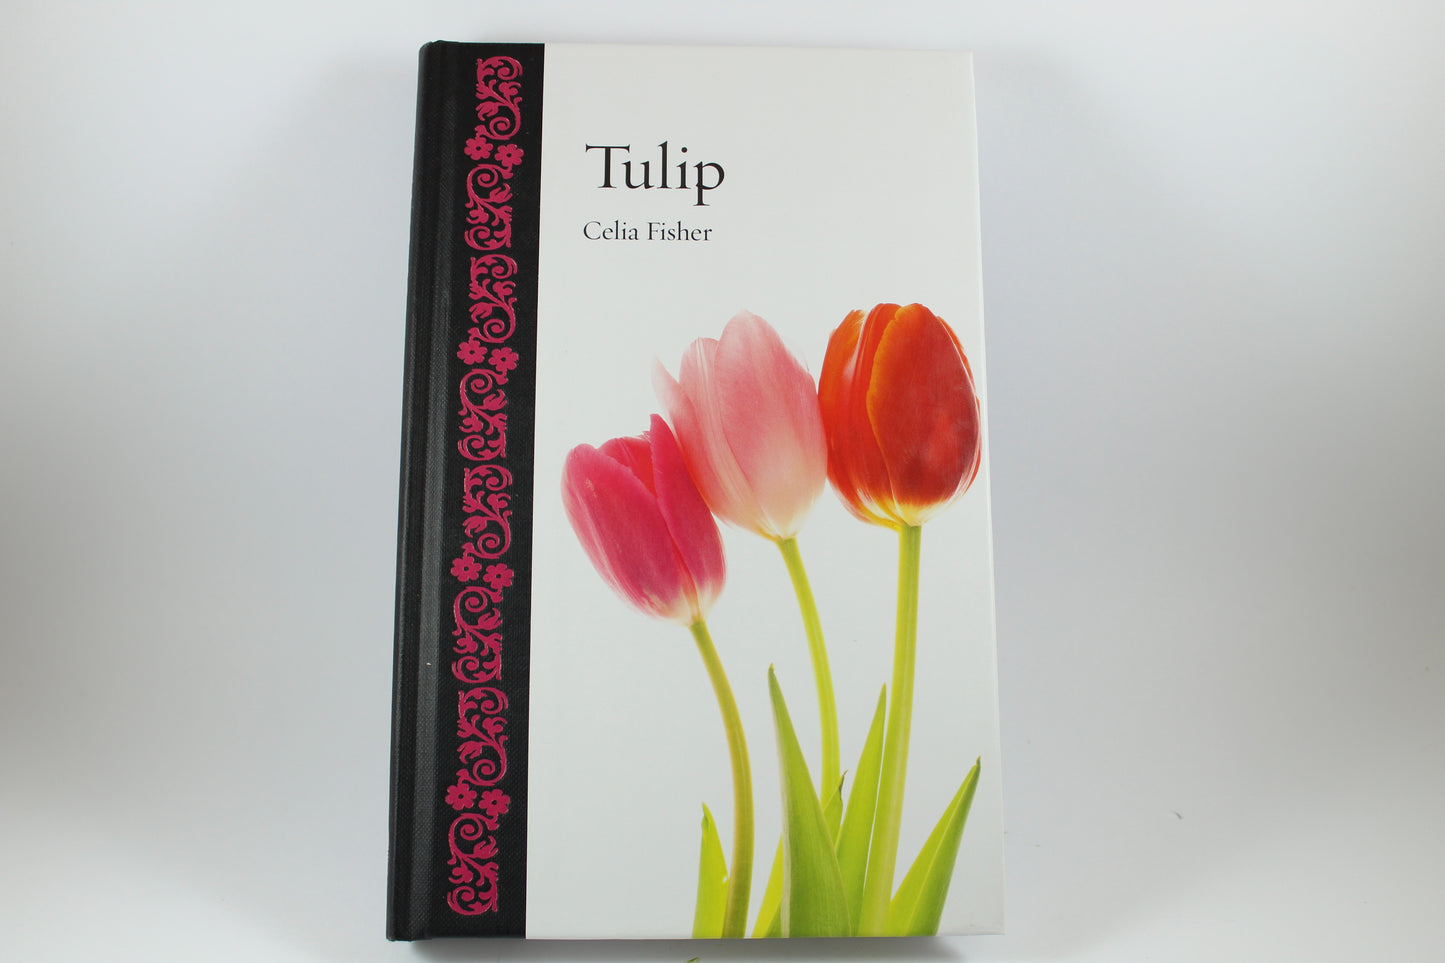 Tulip by Celia Fisher Book